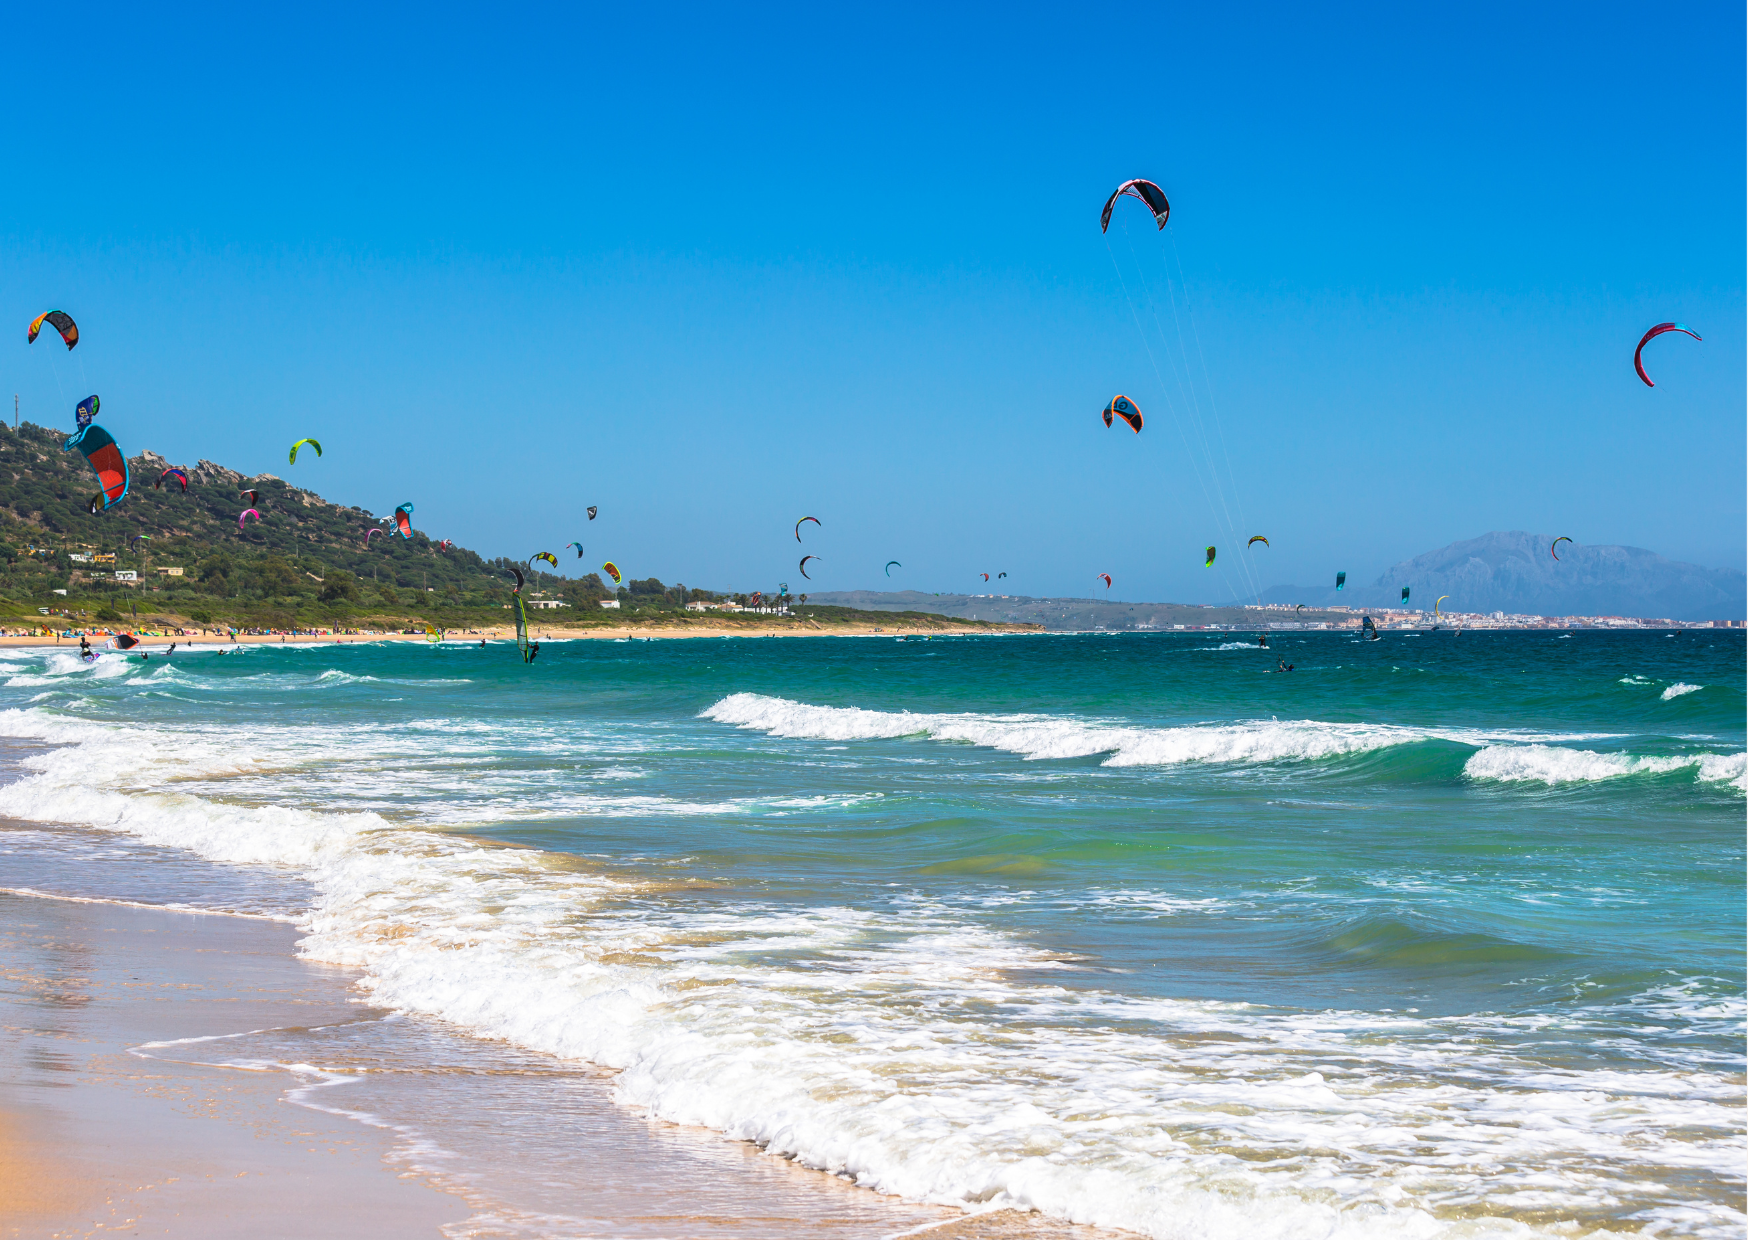 Tarifa, located at the southern tip of Spain, is known as the 'Windsurfing Capital of Europe.' With strong, consistent winds throughout the year, Tarifa is a paradise for kitesurfers. The best time to go is between April and October, with peak winds during the summer months.